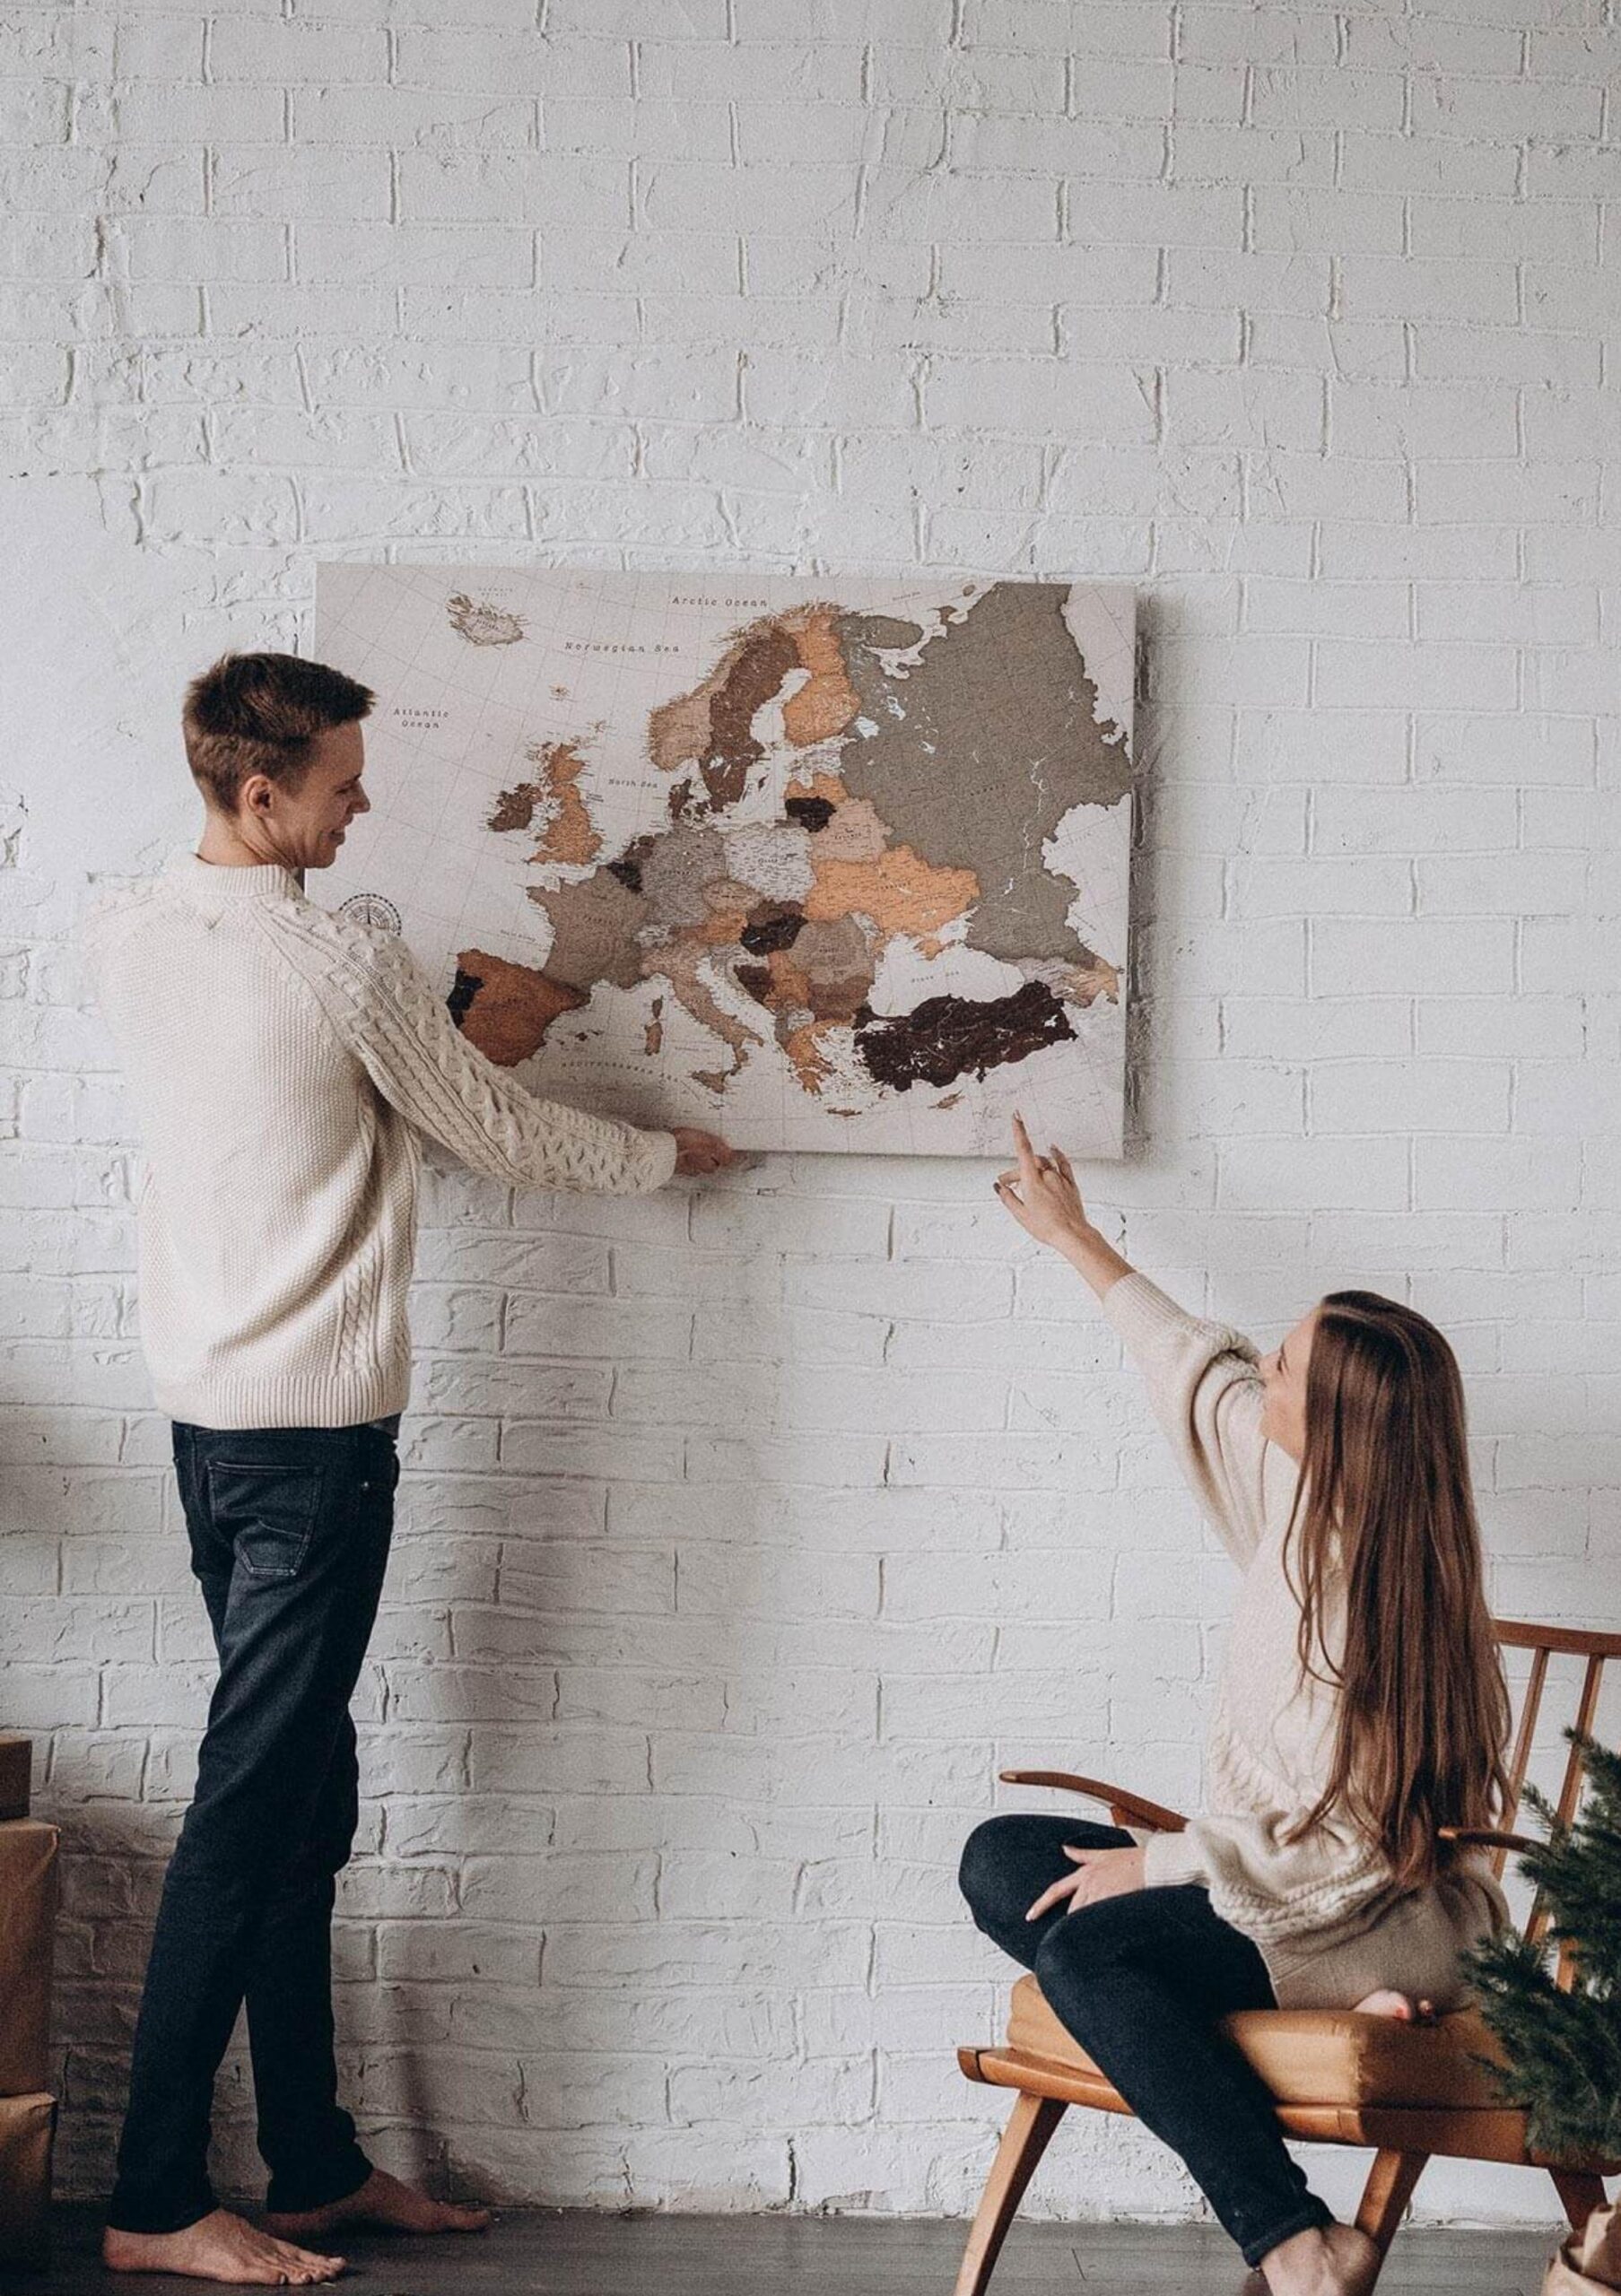 3 Best–Selling Europe Map Pin Boards to Track Your Adventures
